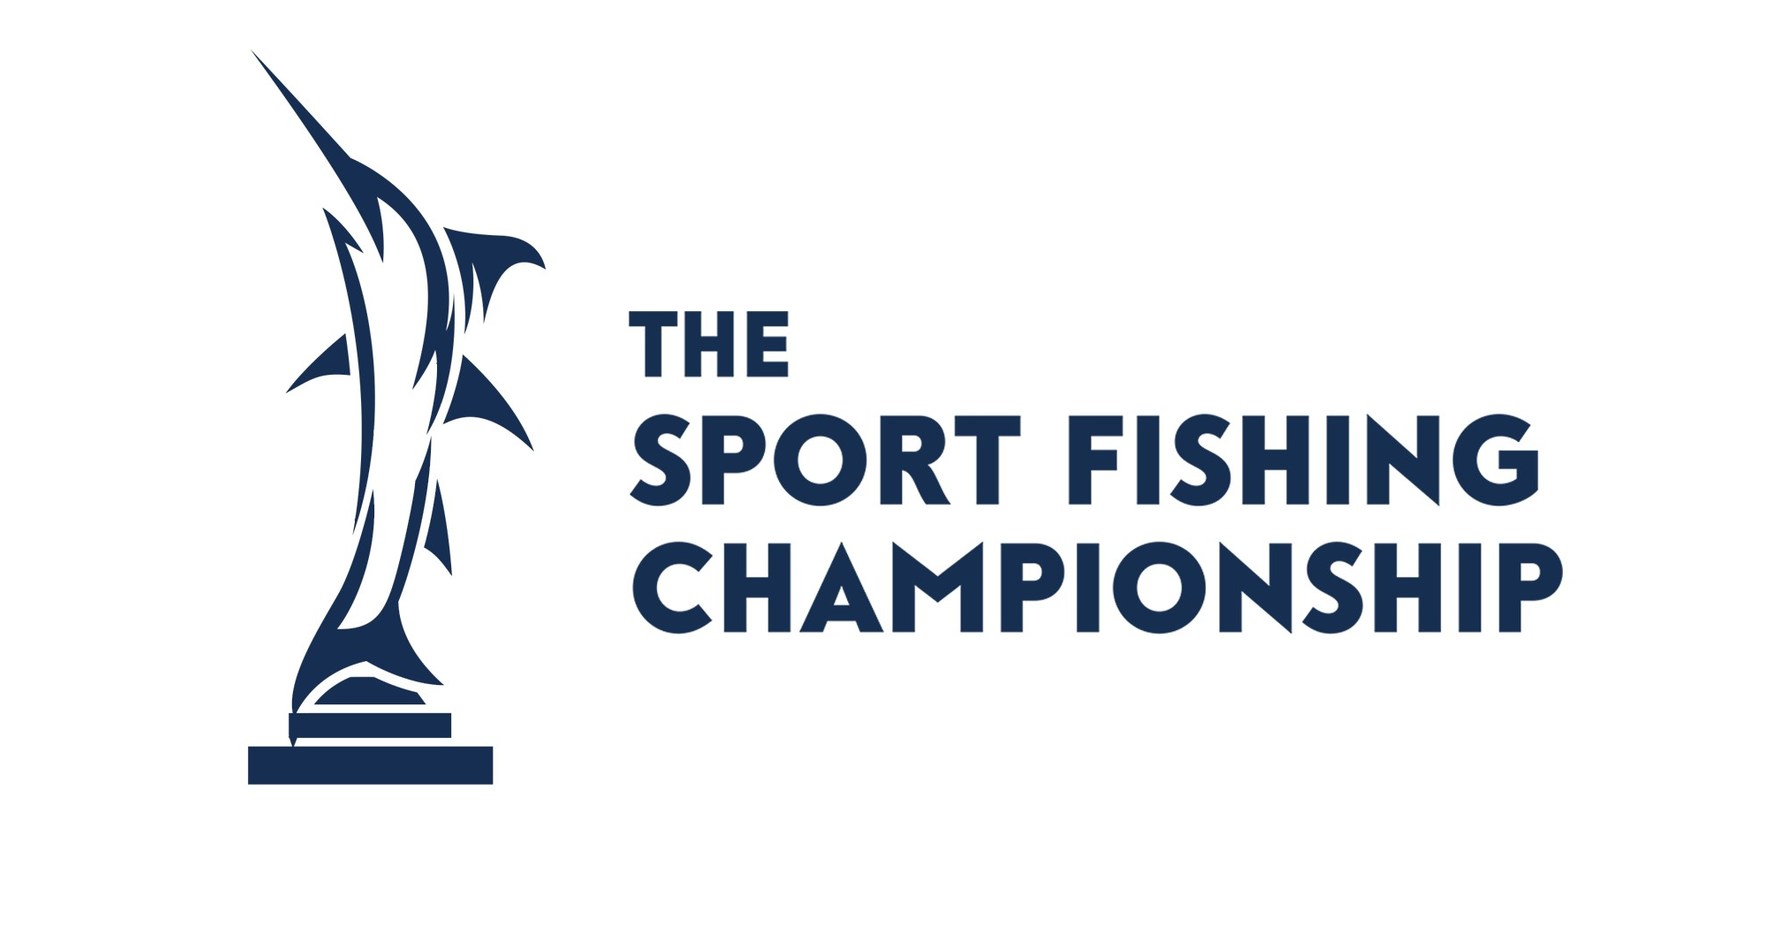 SPORT FISHING CHAMPIONSHIP ANNOUNCES $1MM GRAND PRIZE TO BE